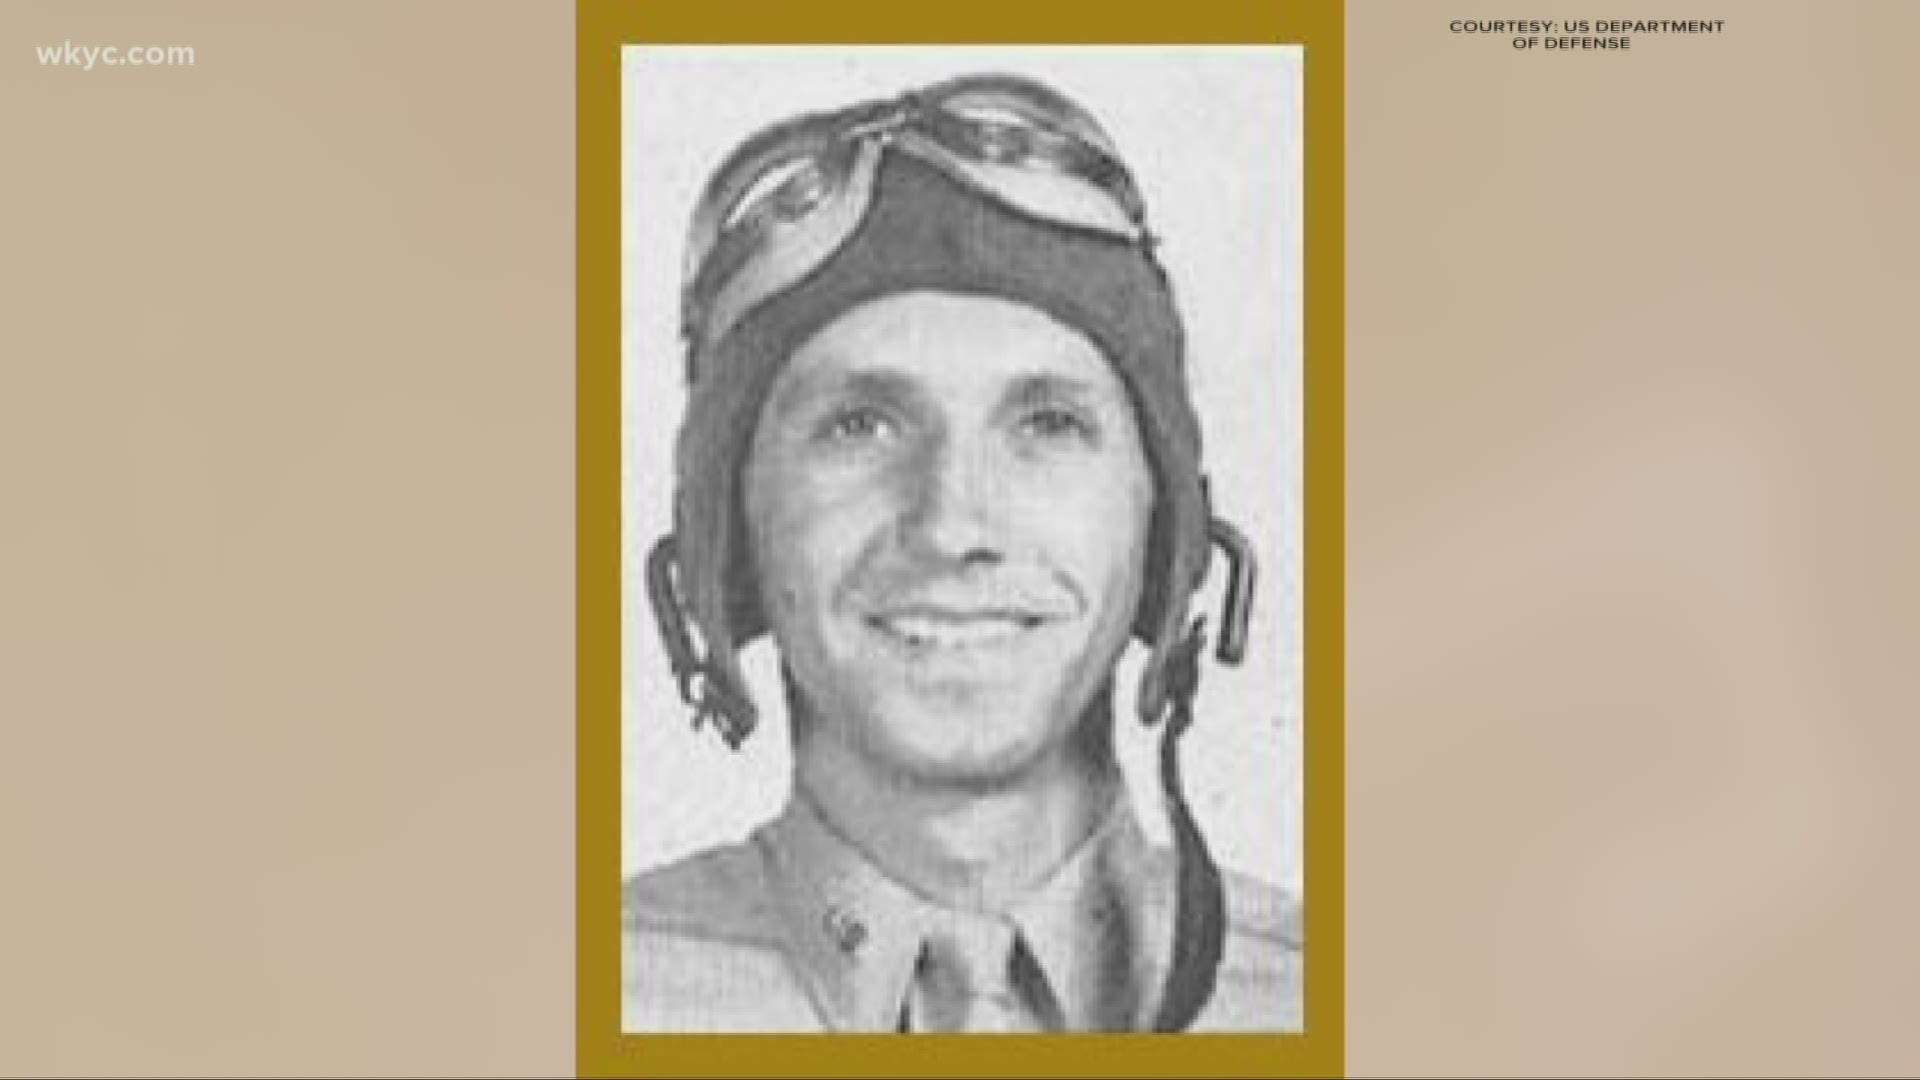 The remains of a World War II pilot from Ohio will be coming home. 1st Lt. Steve Nagy of Lorain is returning home 75 years after his plane was shot down.